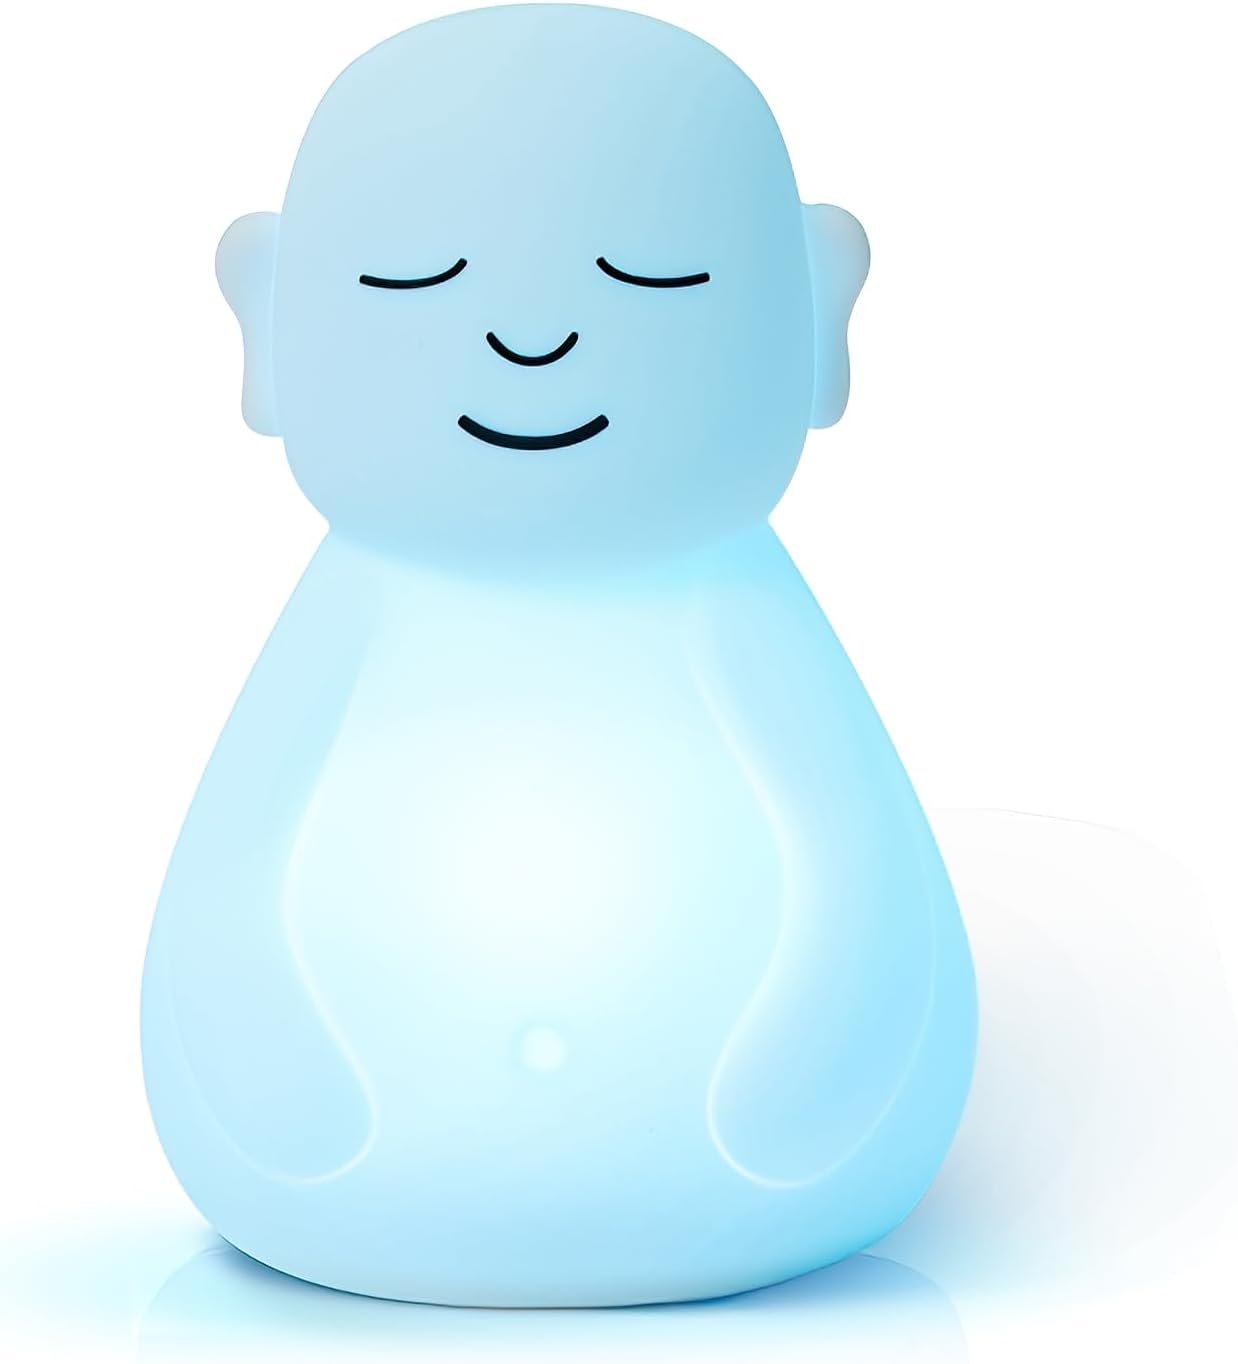 CalmSight Breathing Buddha Your Ultimate Guided Visual Meditation Tool for Stress Relief